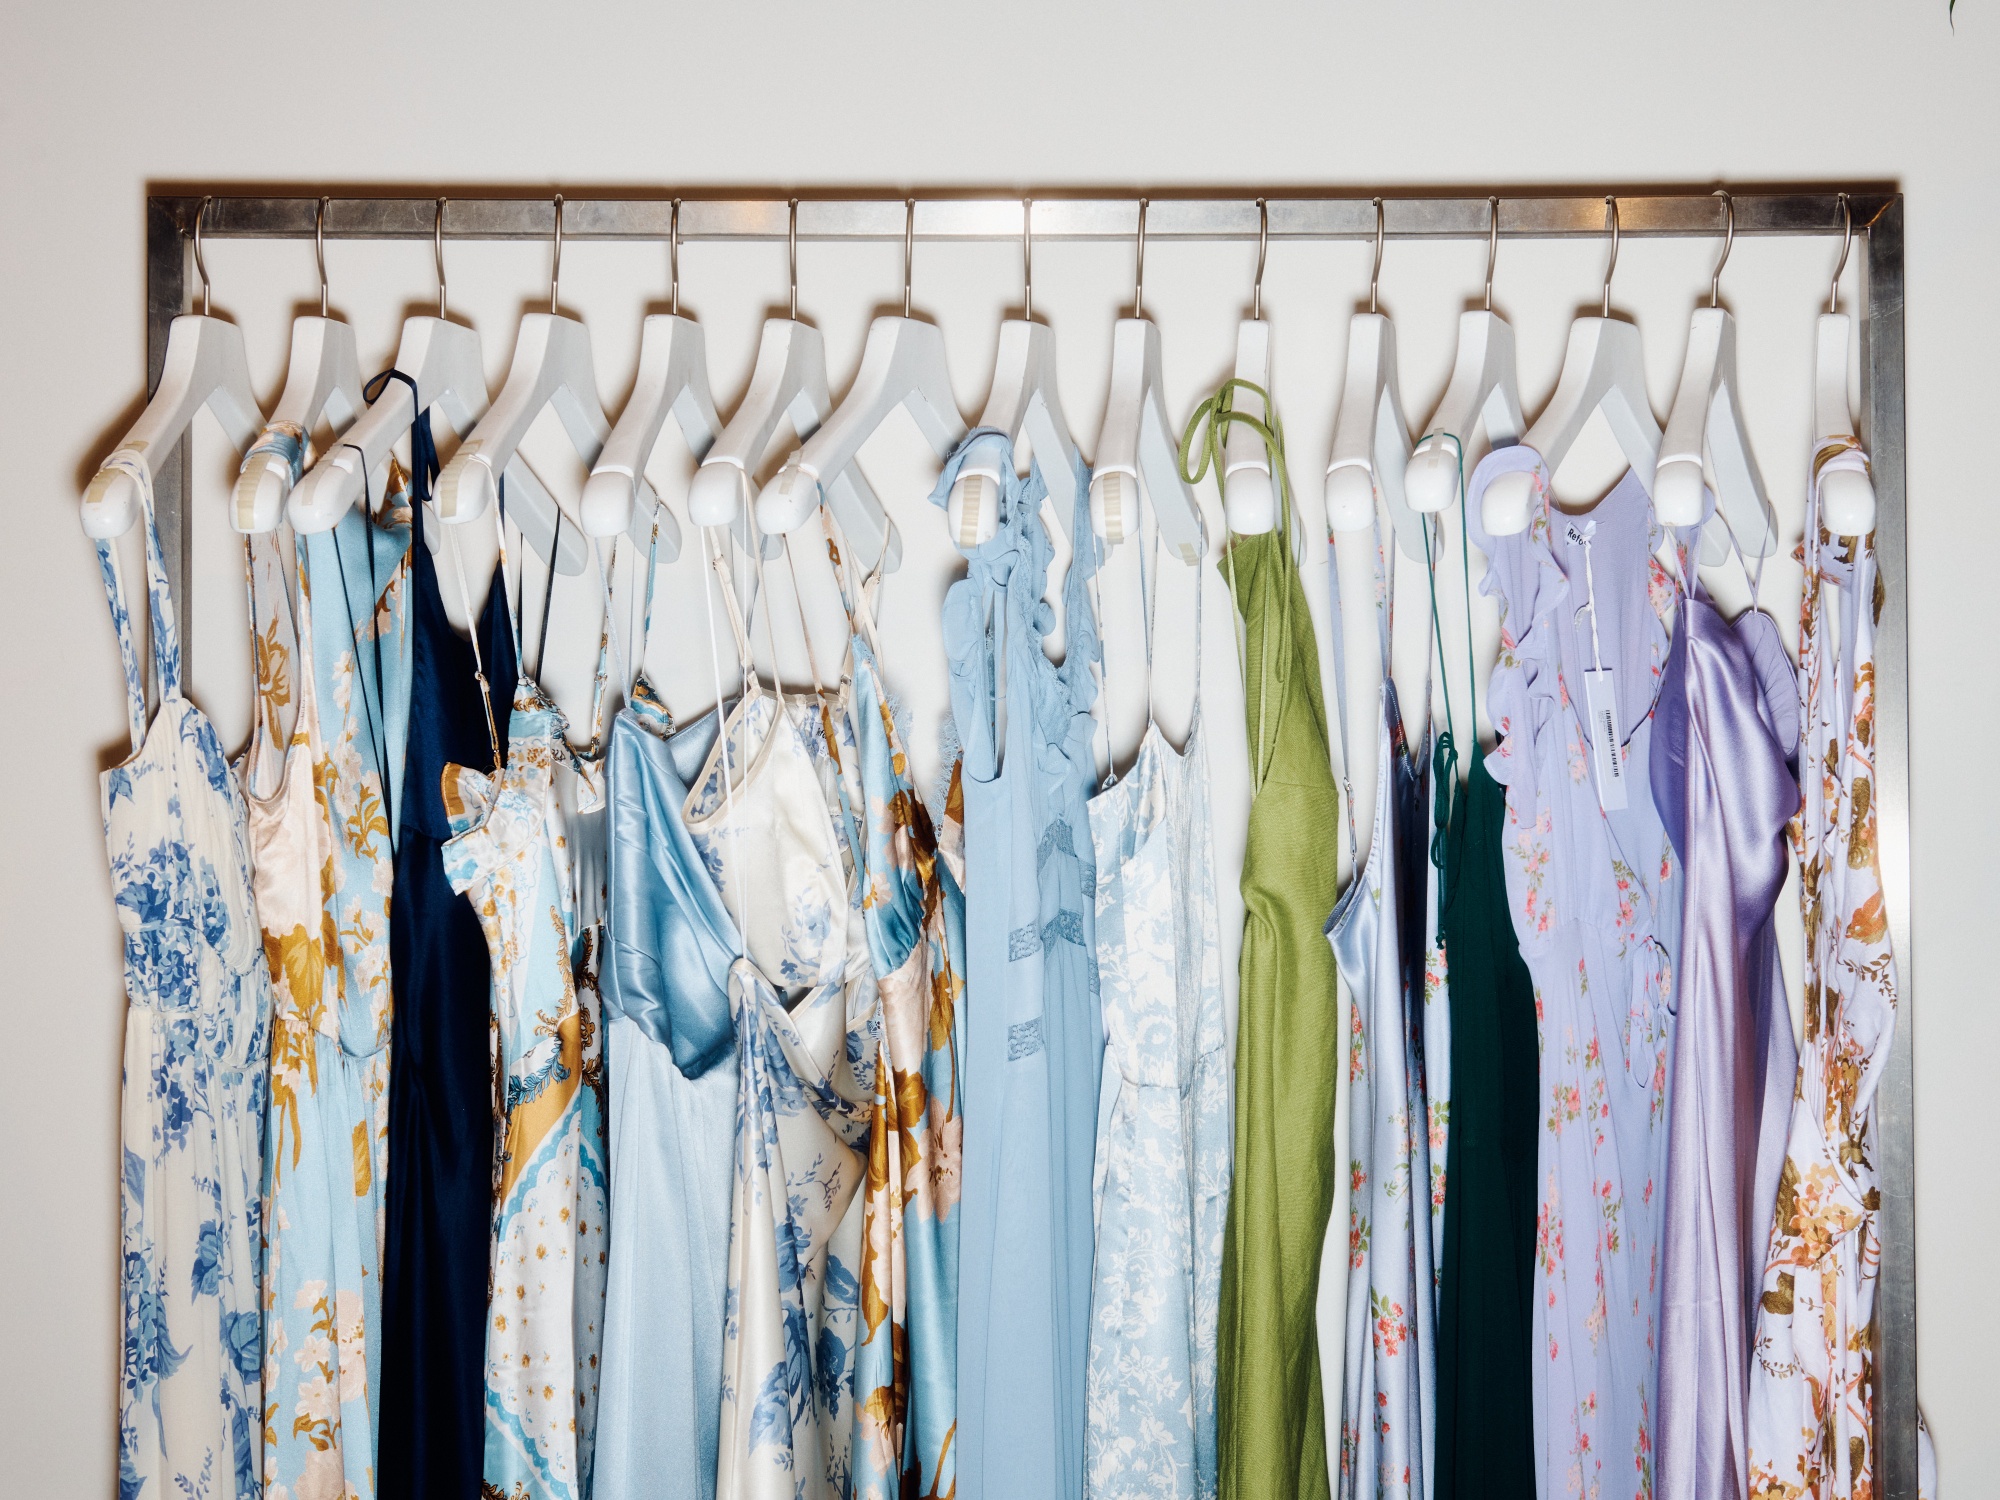 This Company Wants to Make it Easier to Buy Used Clothes Online - Bloomberg